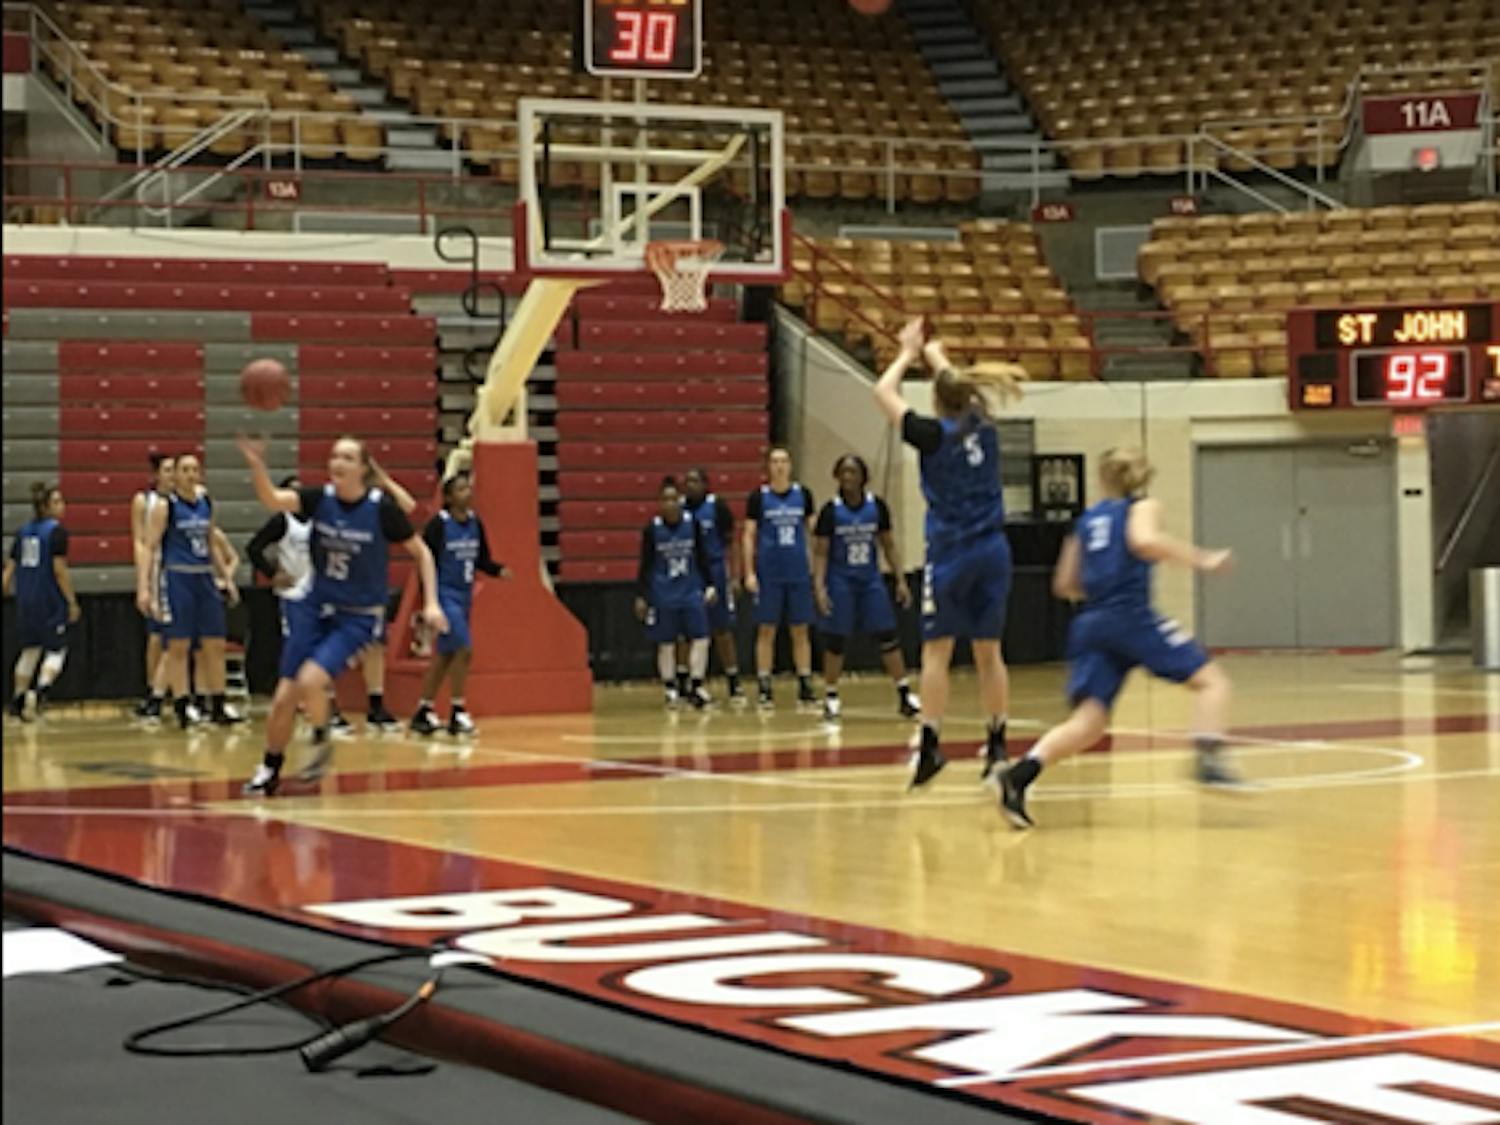 The Buffalo women's basketball team practices in the St. John Arena Thursday afternoon to prepare for its matchup with No. 3 seed Ohio State.&nbsp;